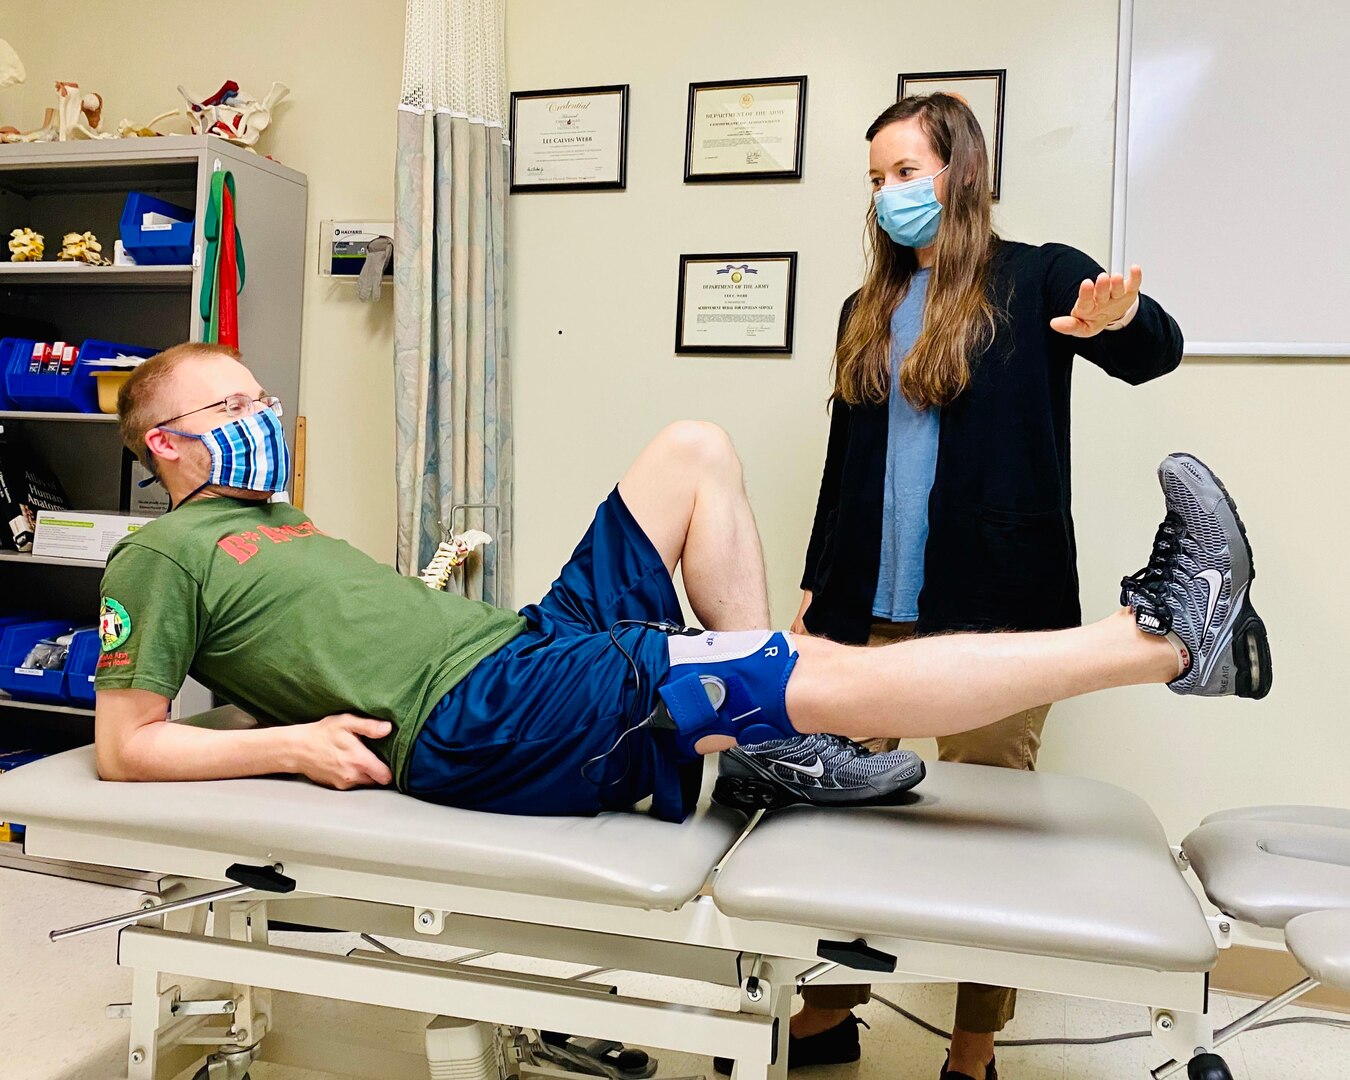 Research assistant, Kayla Enochs, directs BACH physical therapist Dr. Lee Webb, to raise his leg during a physical therapy session demonstrating exercises performed by Soldiers enrolled in a research study at BACH.